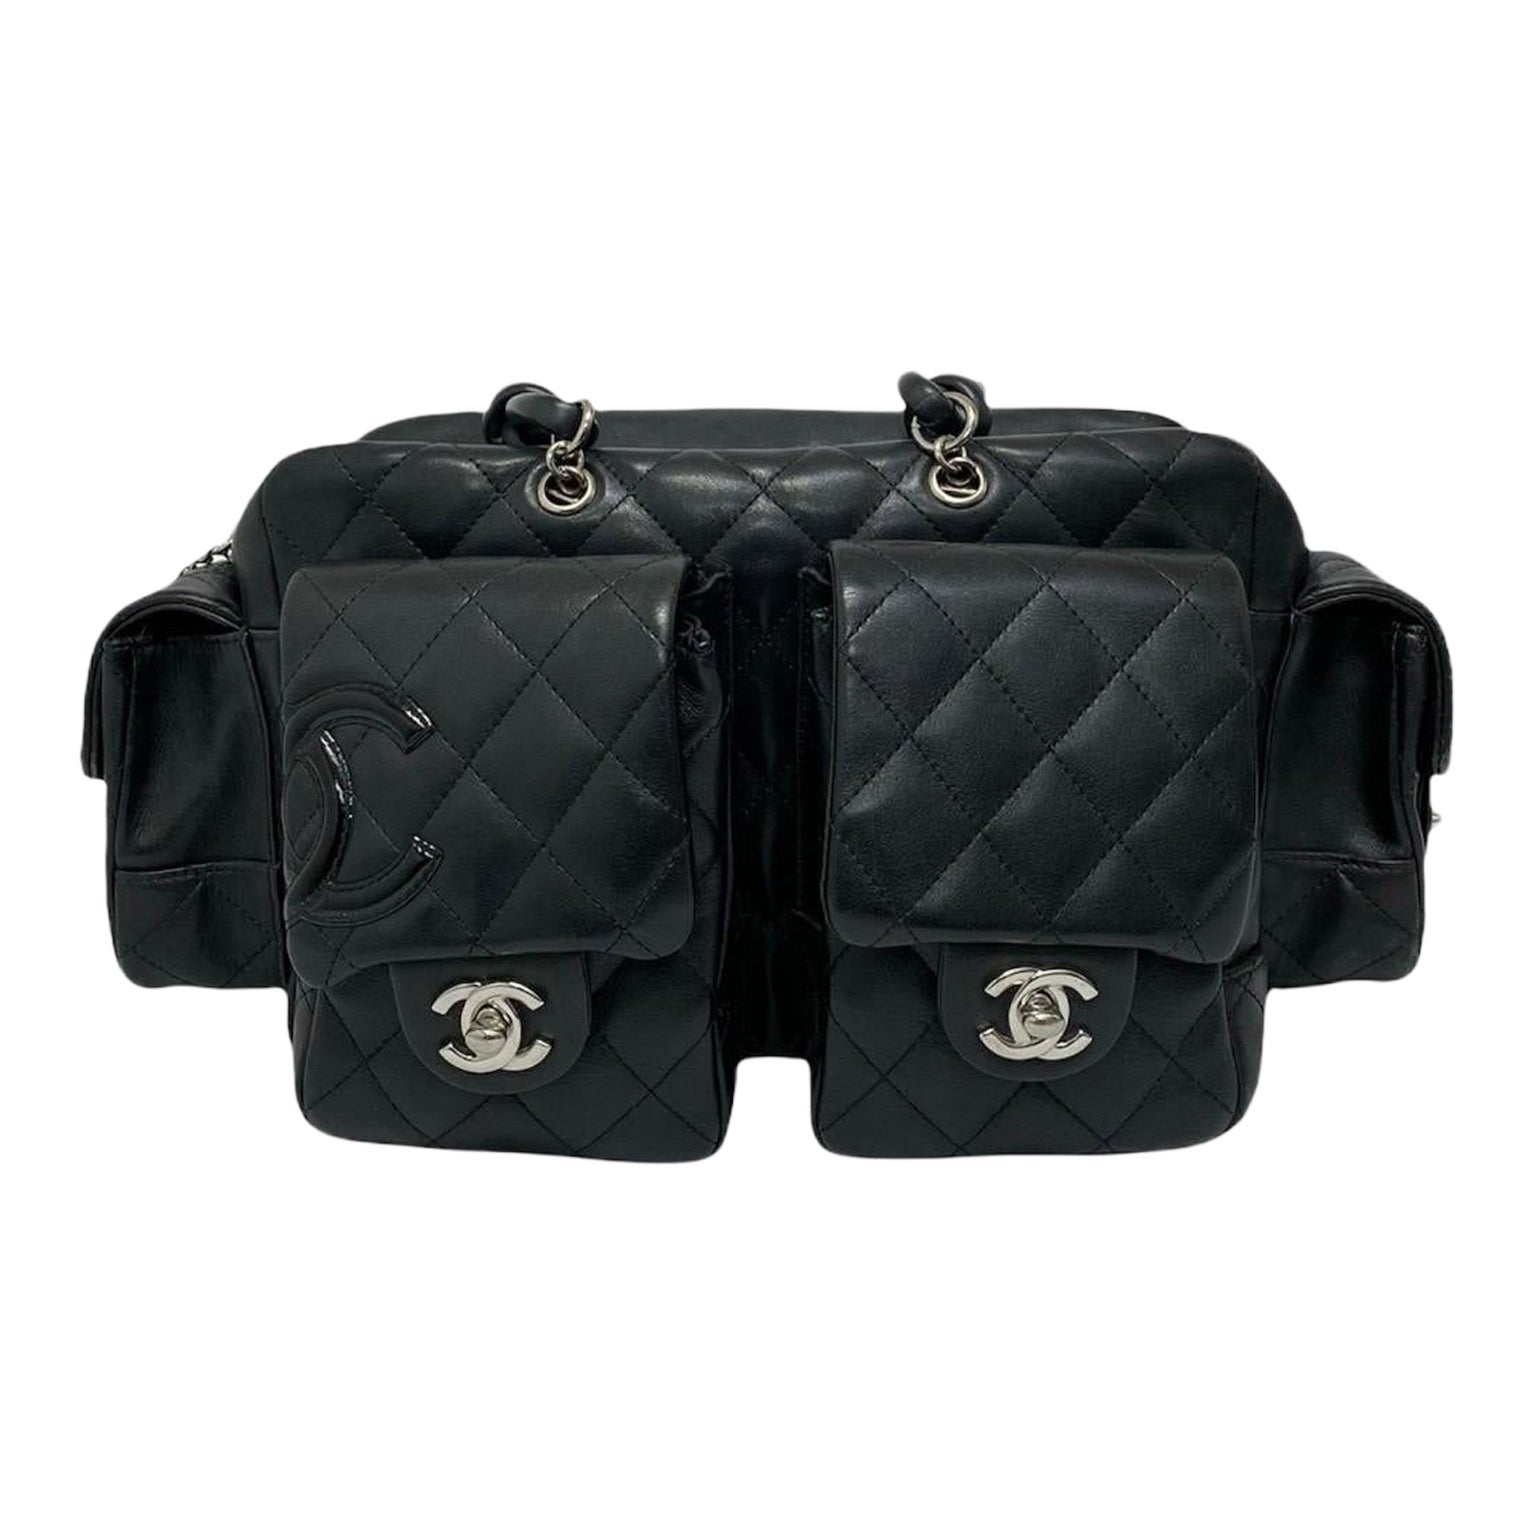 Chanel Black Leather Cambon Bag